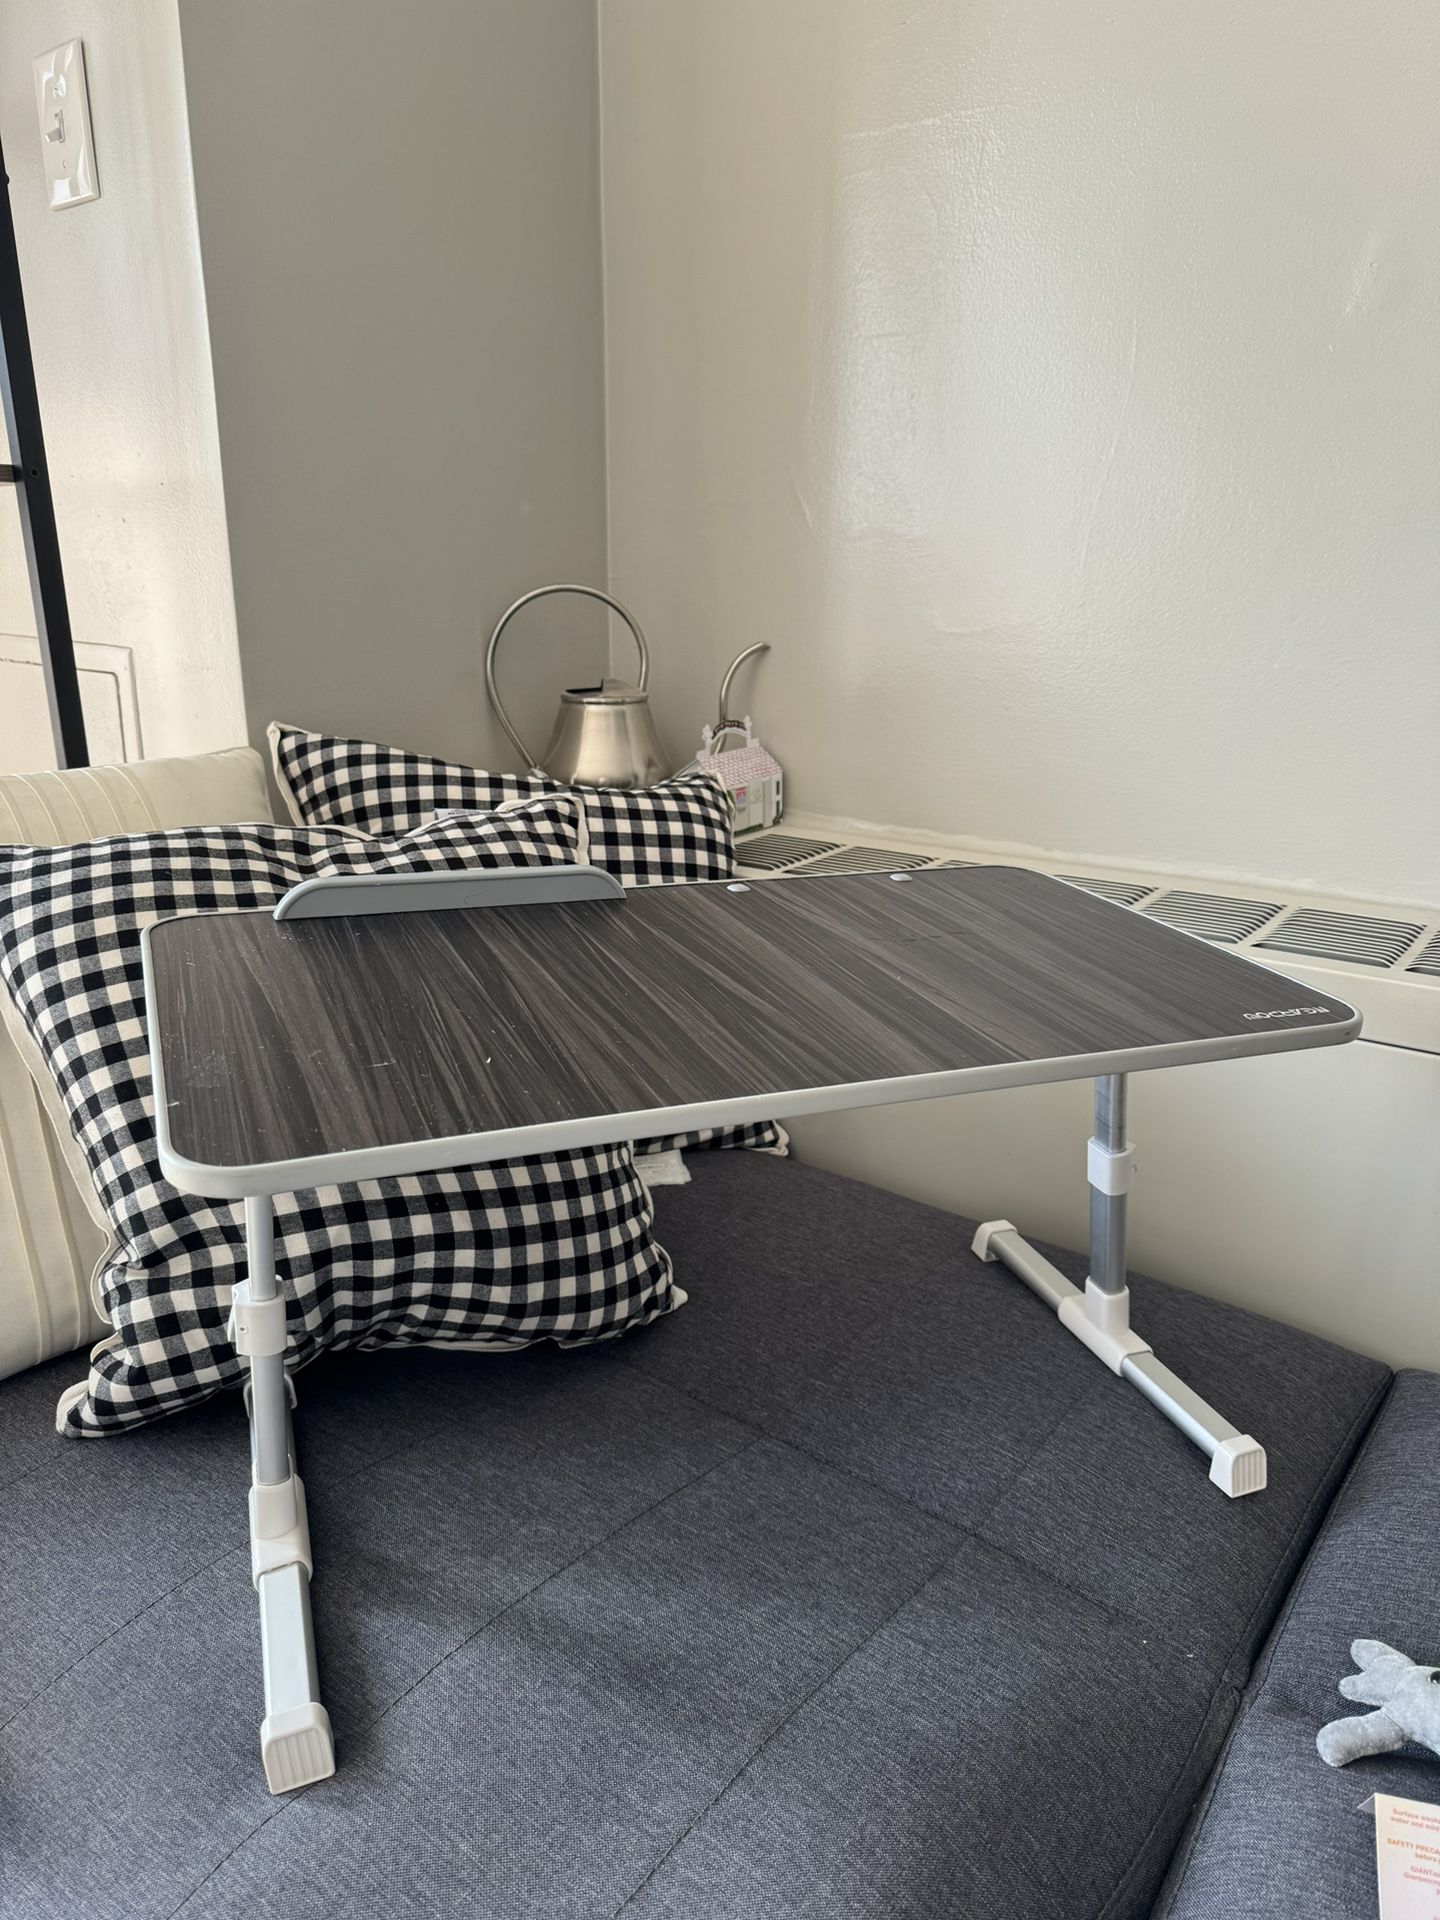 Adjustable Couch Table Desk $15